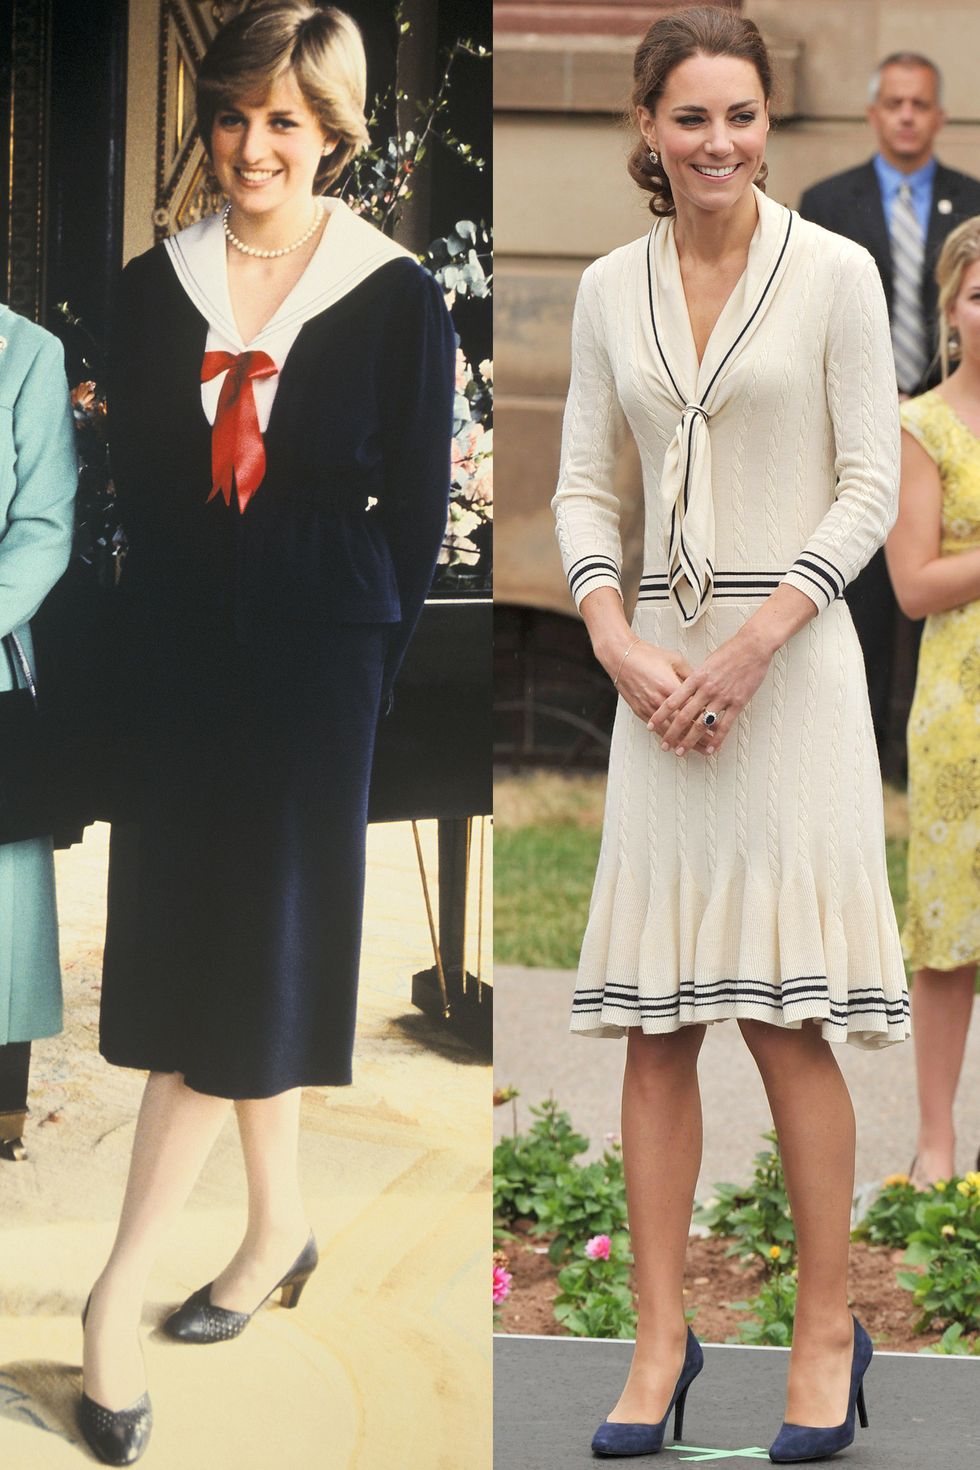 Diana at Buckingham Palace in 1980; Kate wearing Alexander McQueen in Charlottetown, Canada during the Royal Tour of North America in July 2011.